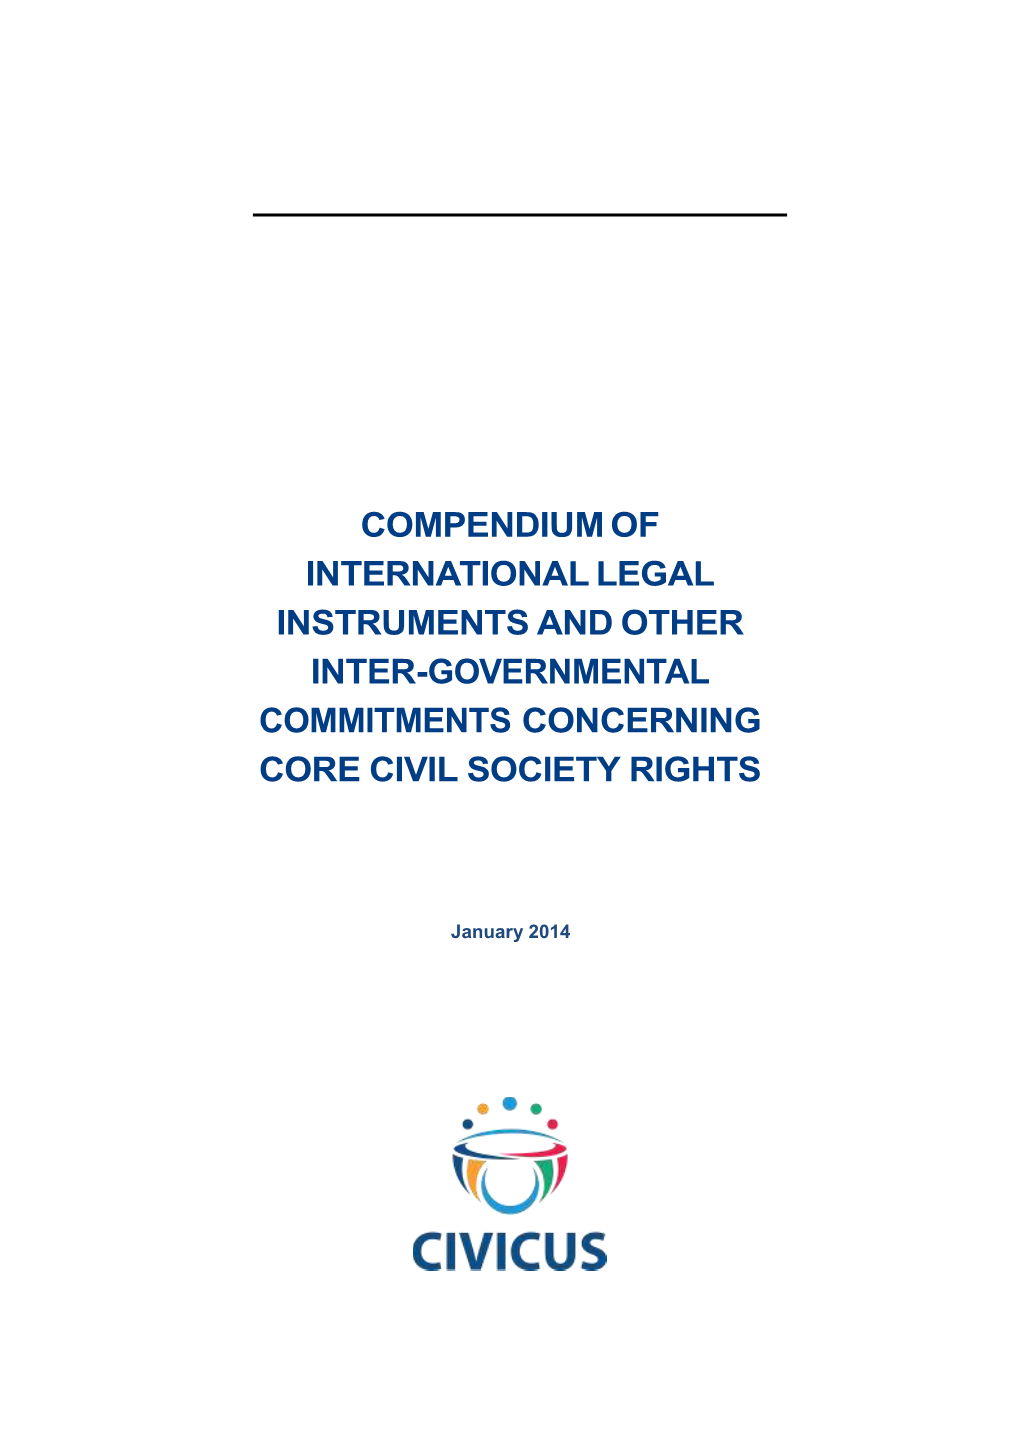 Compendium of International Legal Instruments and Other Inter-Governmental Commitments Concerning Core Civil Society Rights